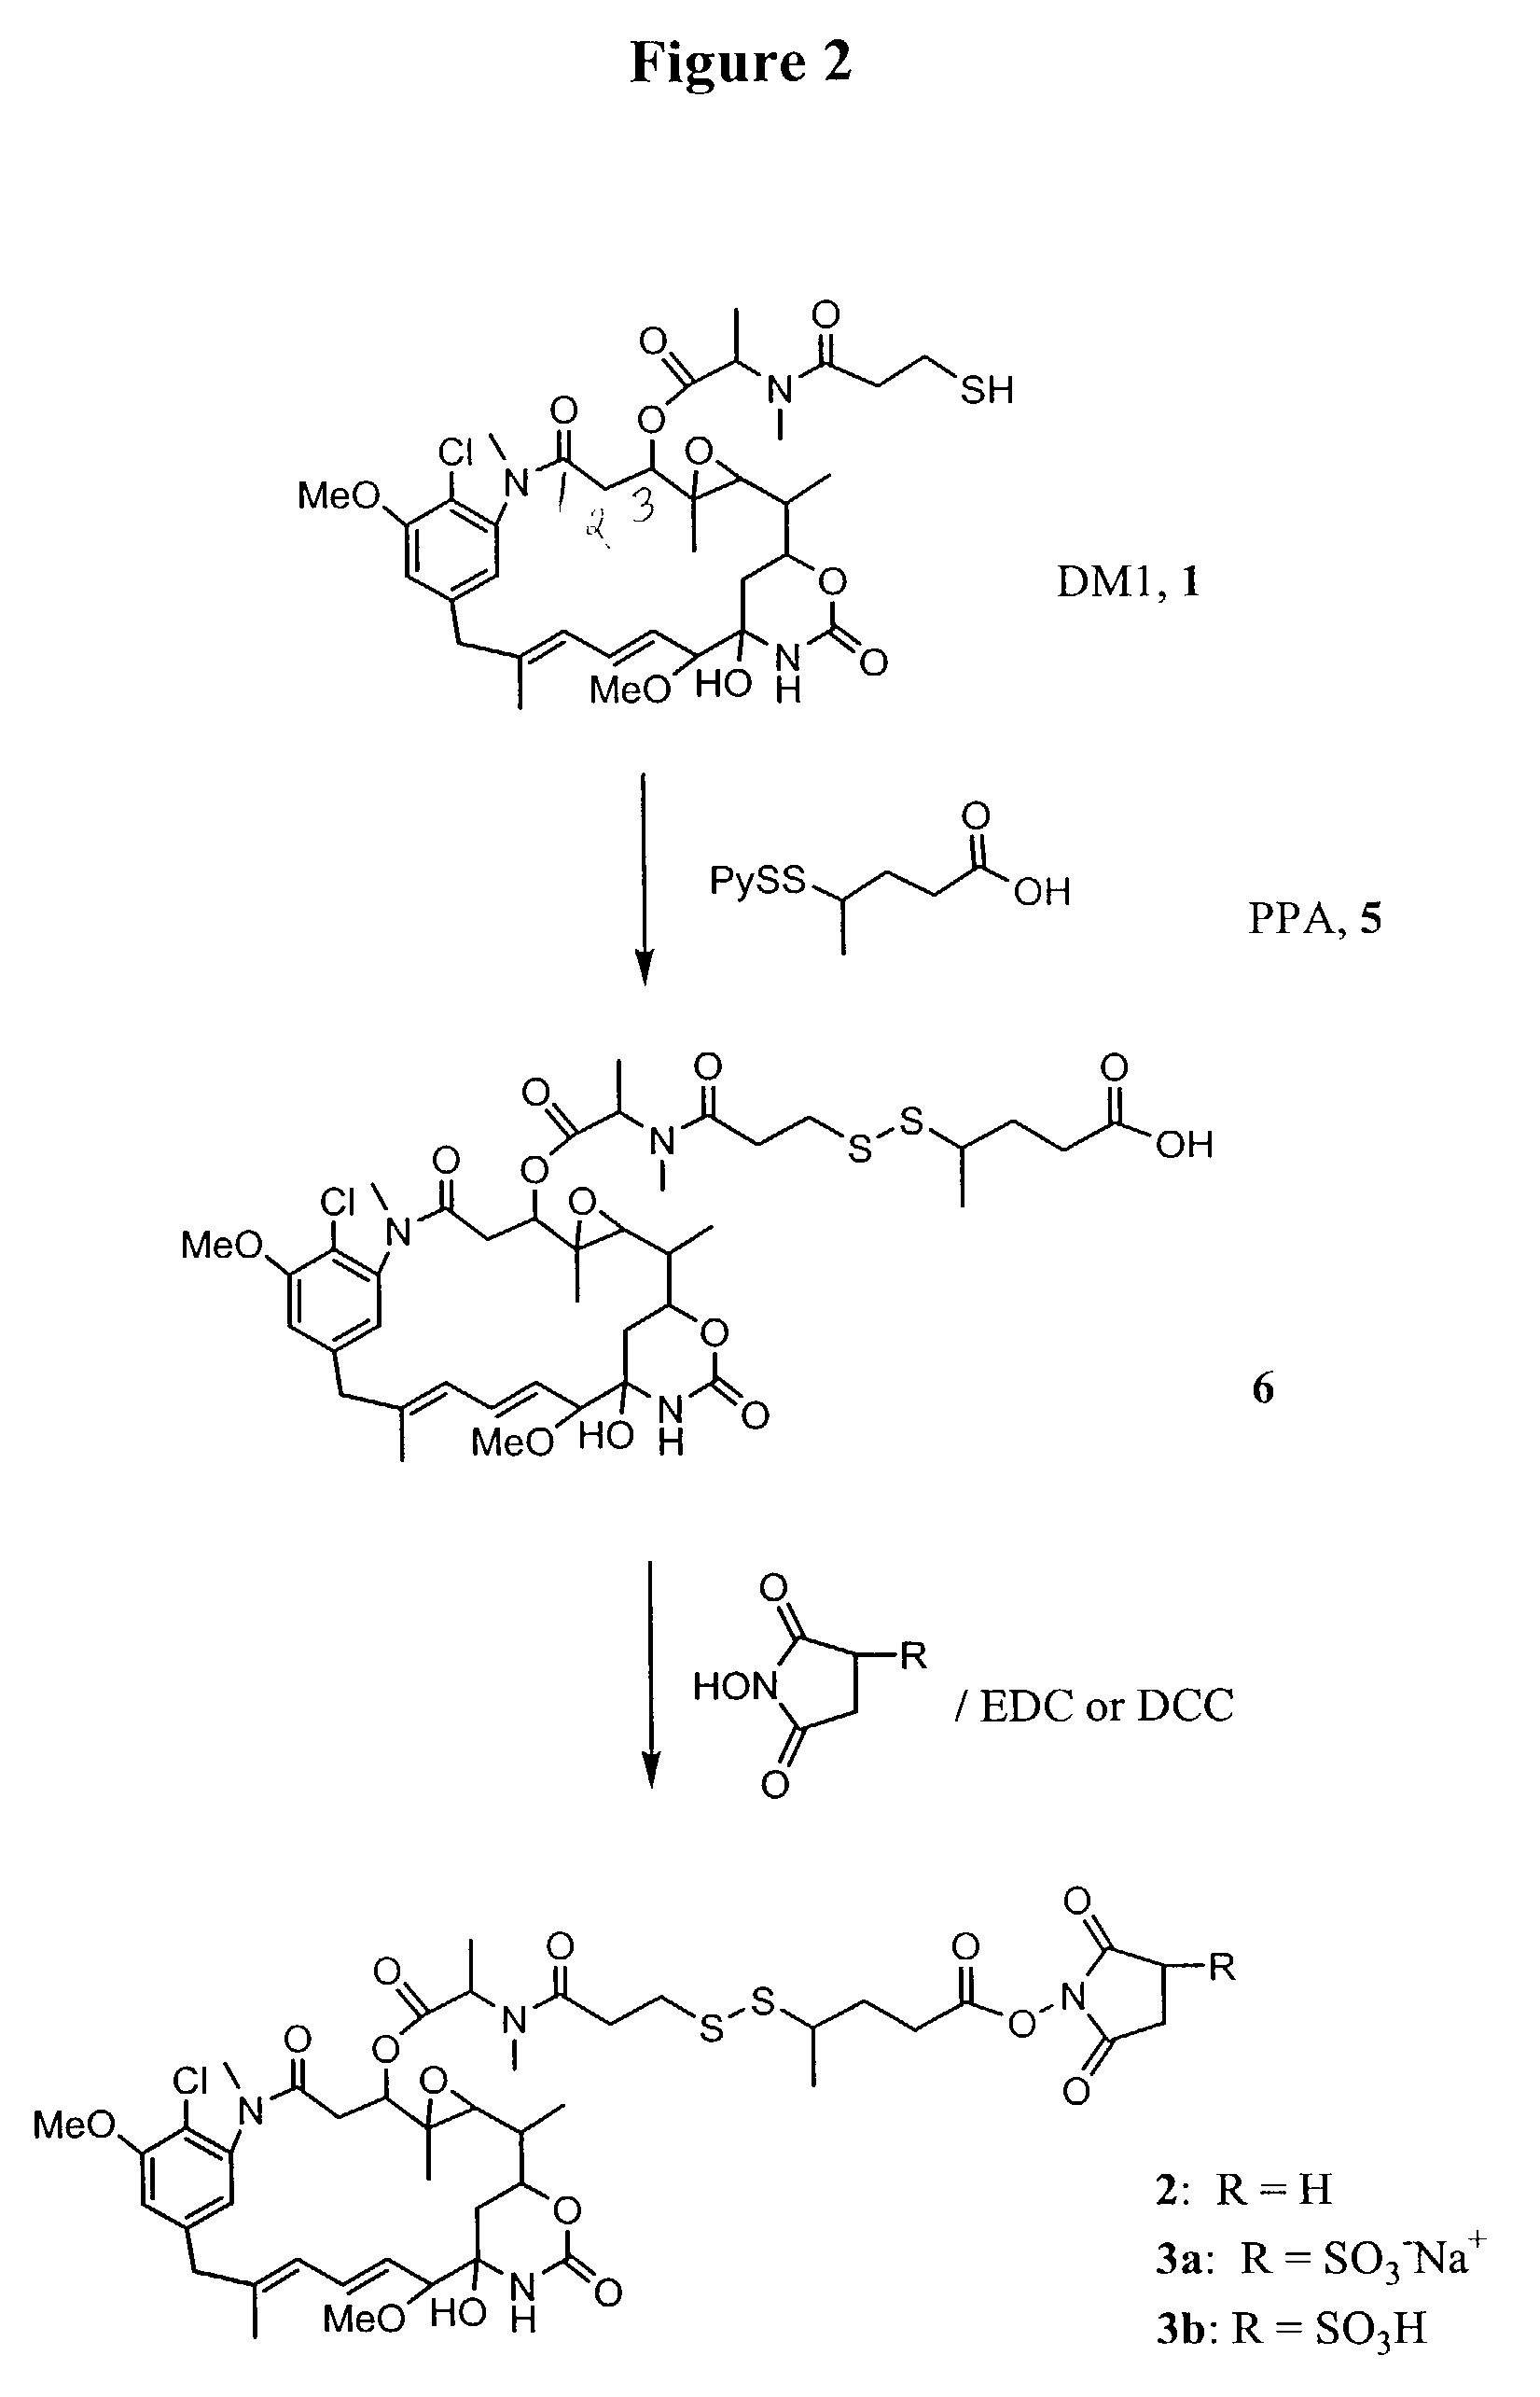 Methods for preparation of cytotoxic conjugates of maytansinoids and cell binding agents